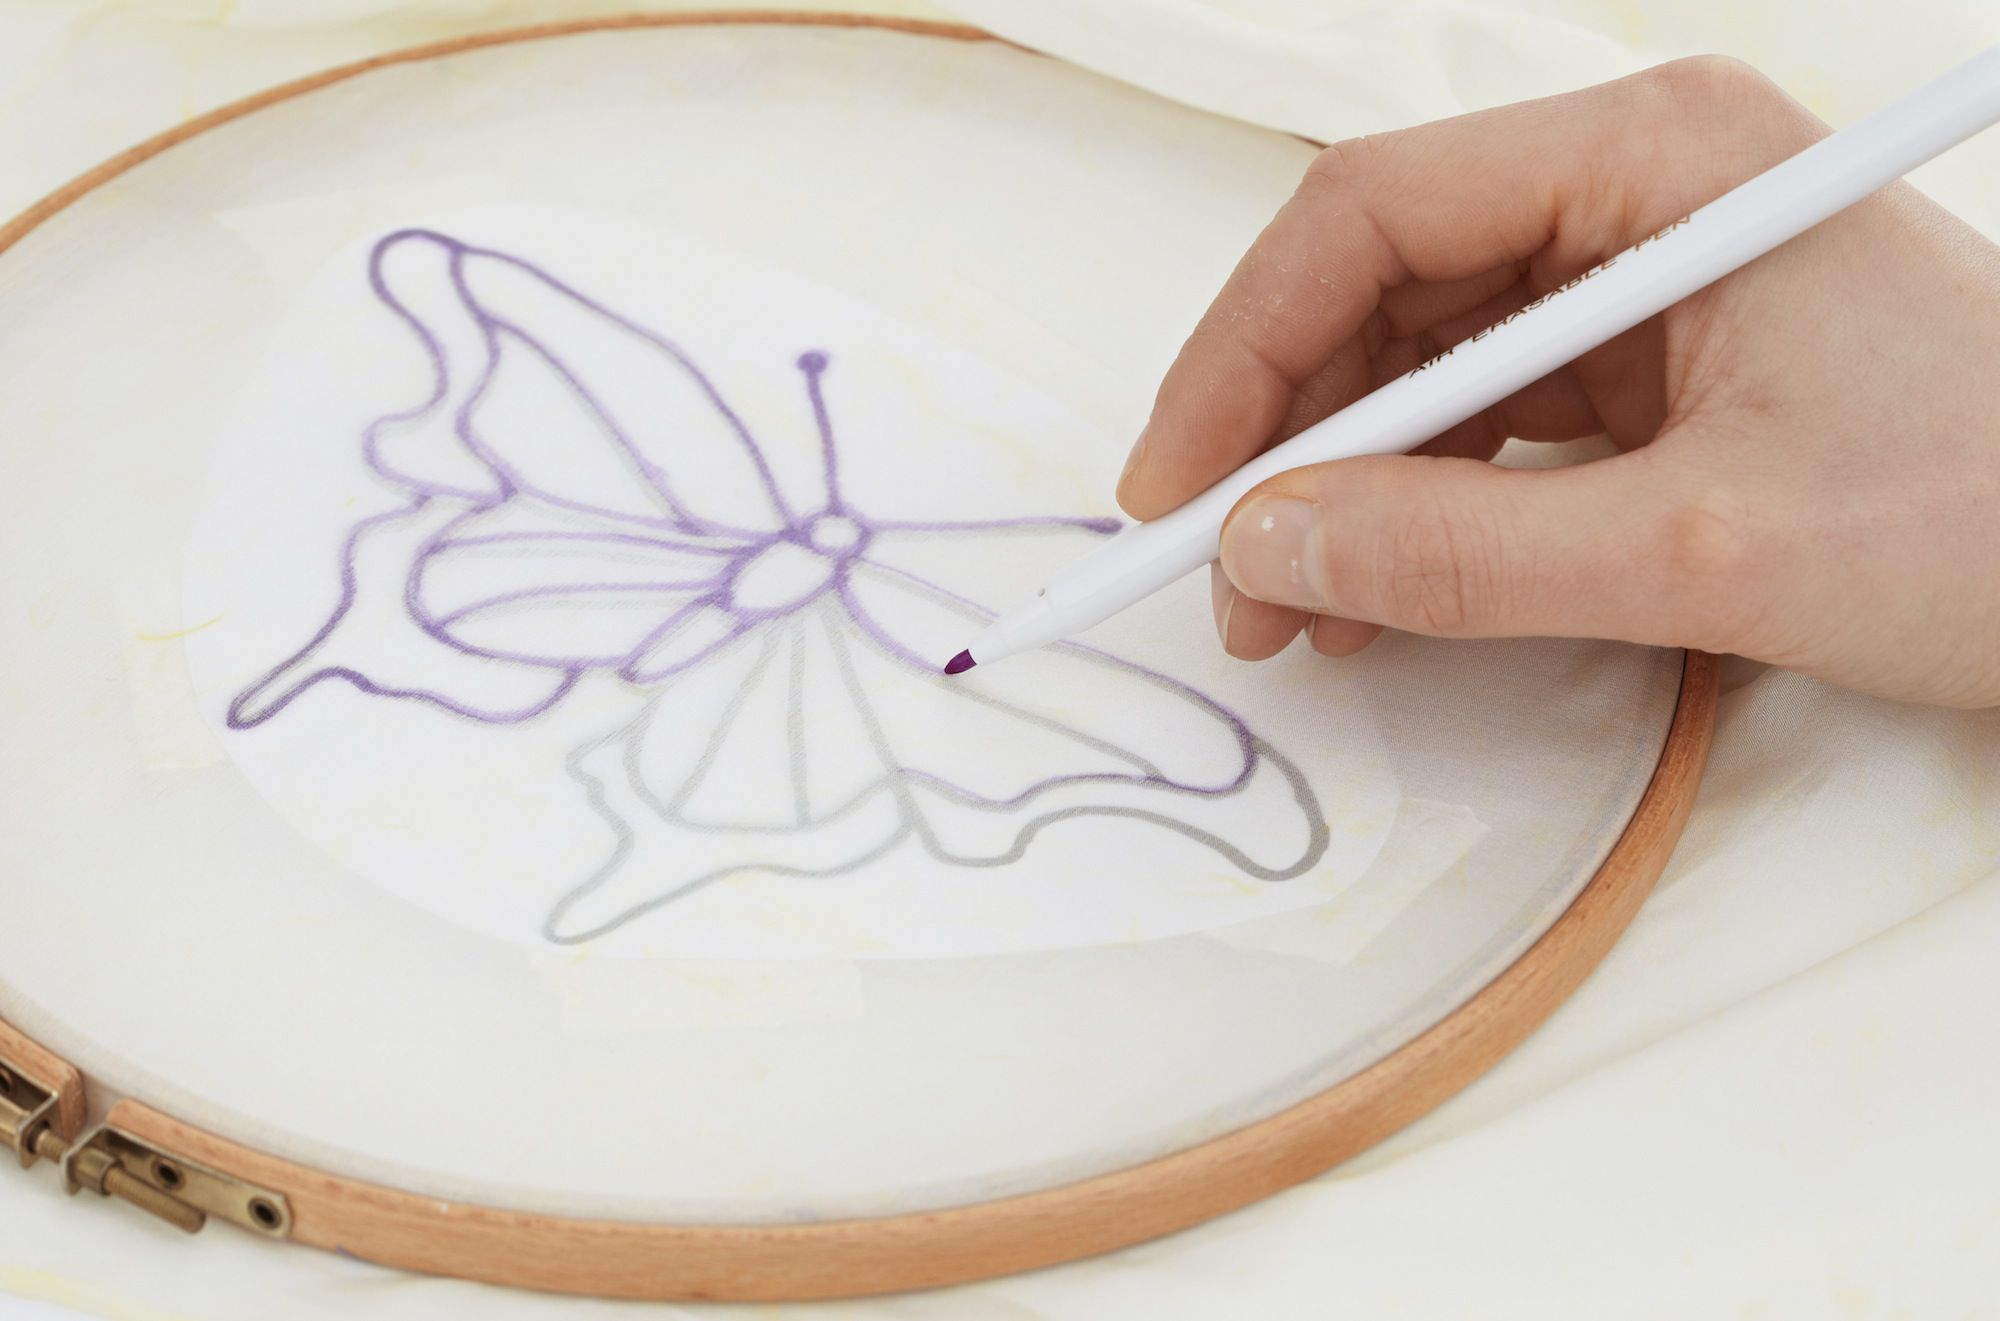 Transfer Embroidery Pattern To Fabric 7 Methods For Marking Or Transferring Embroidery Patterns